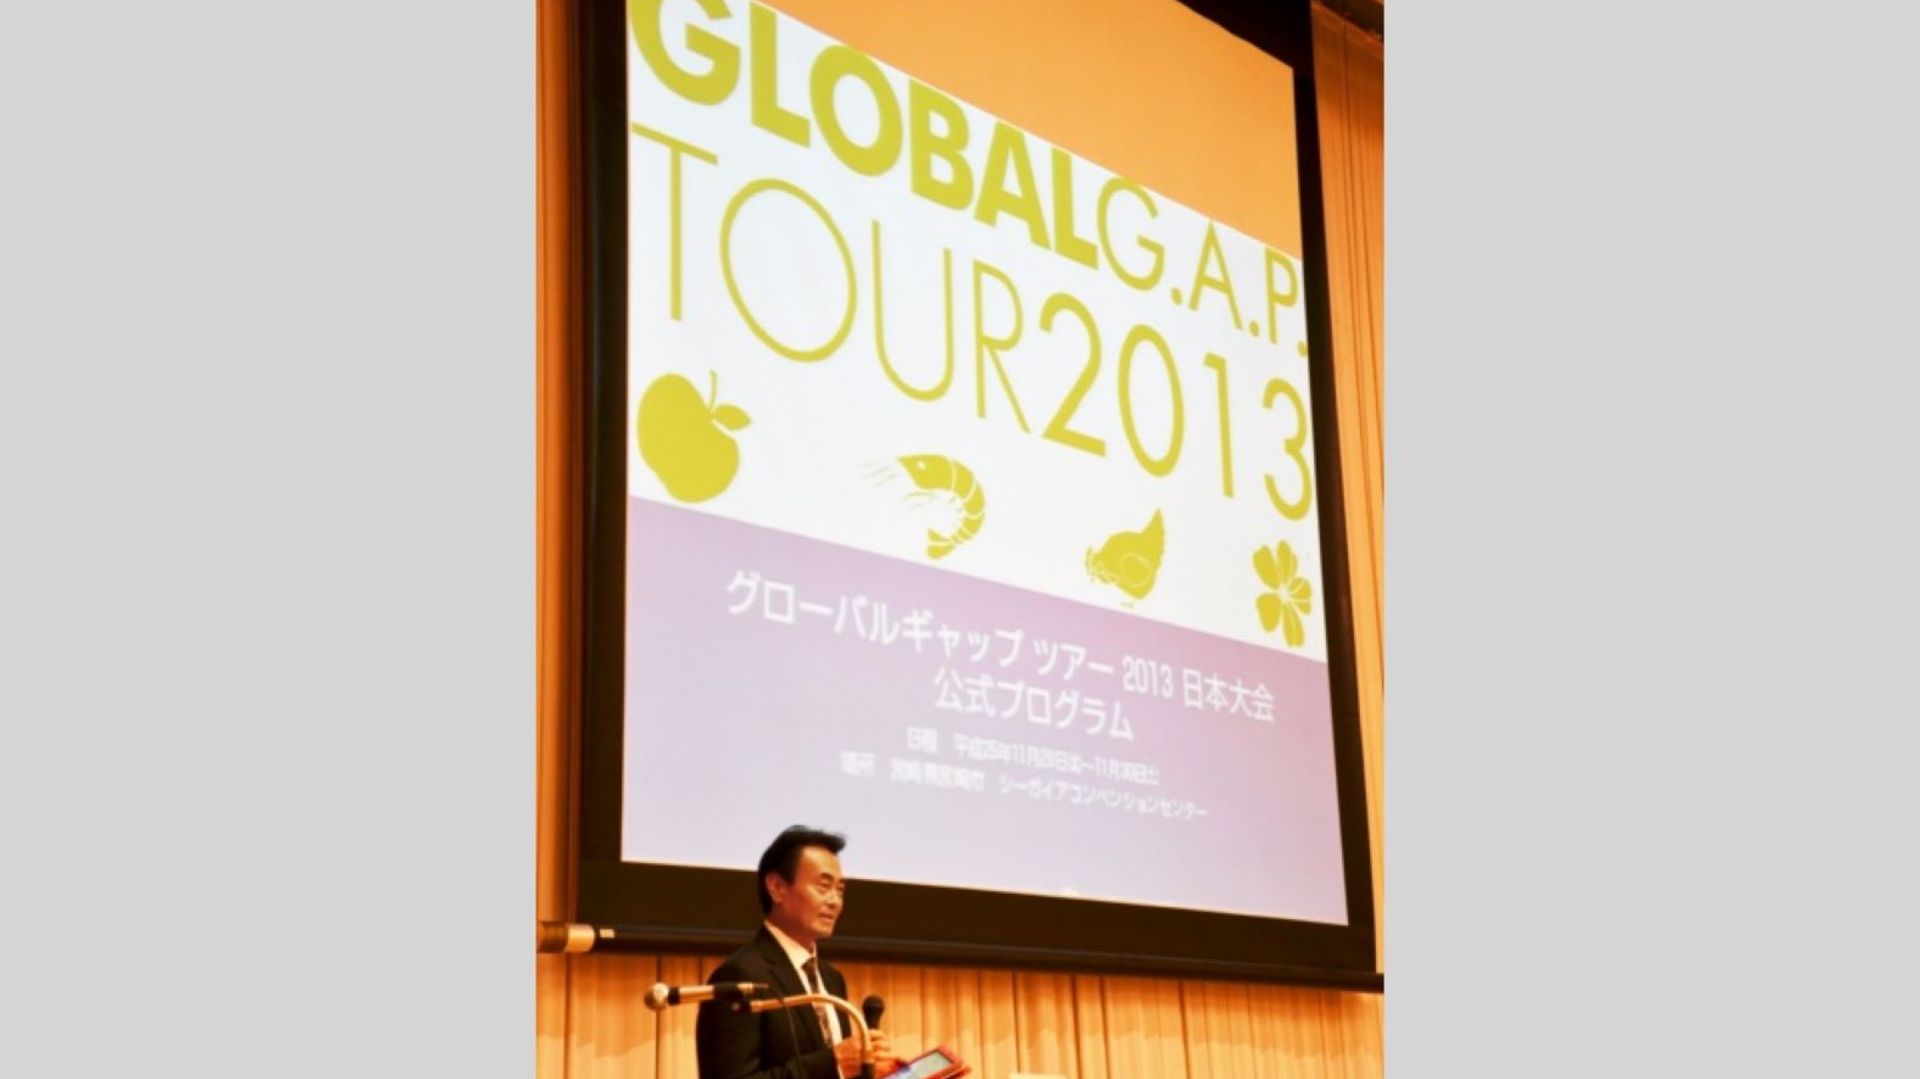 Image of the 2013 GLOBALG.A.P. TOUR stop in Japan